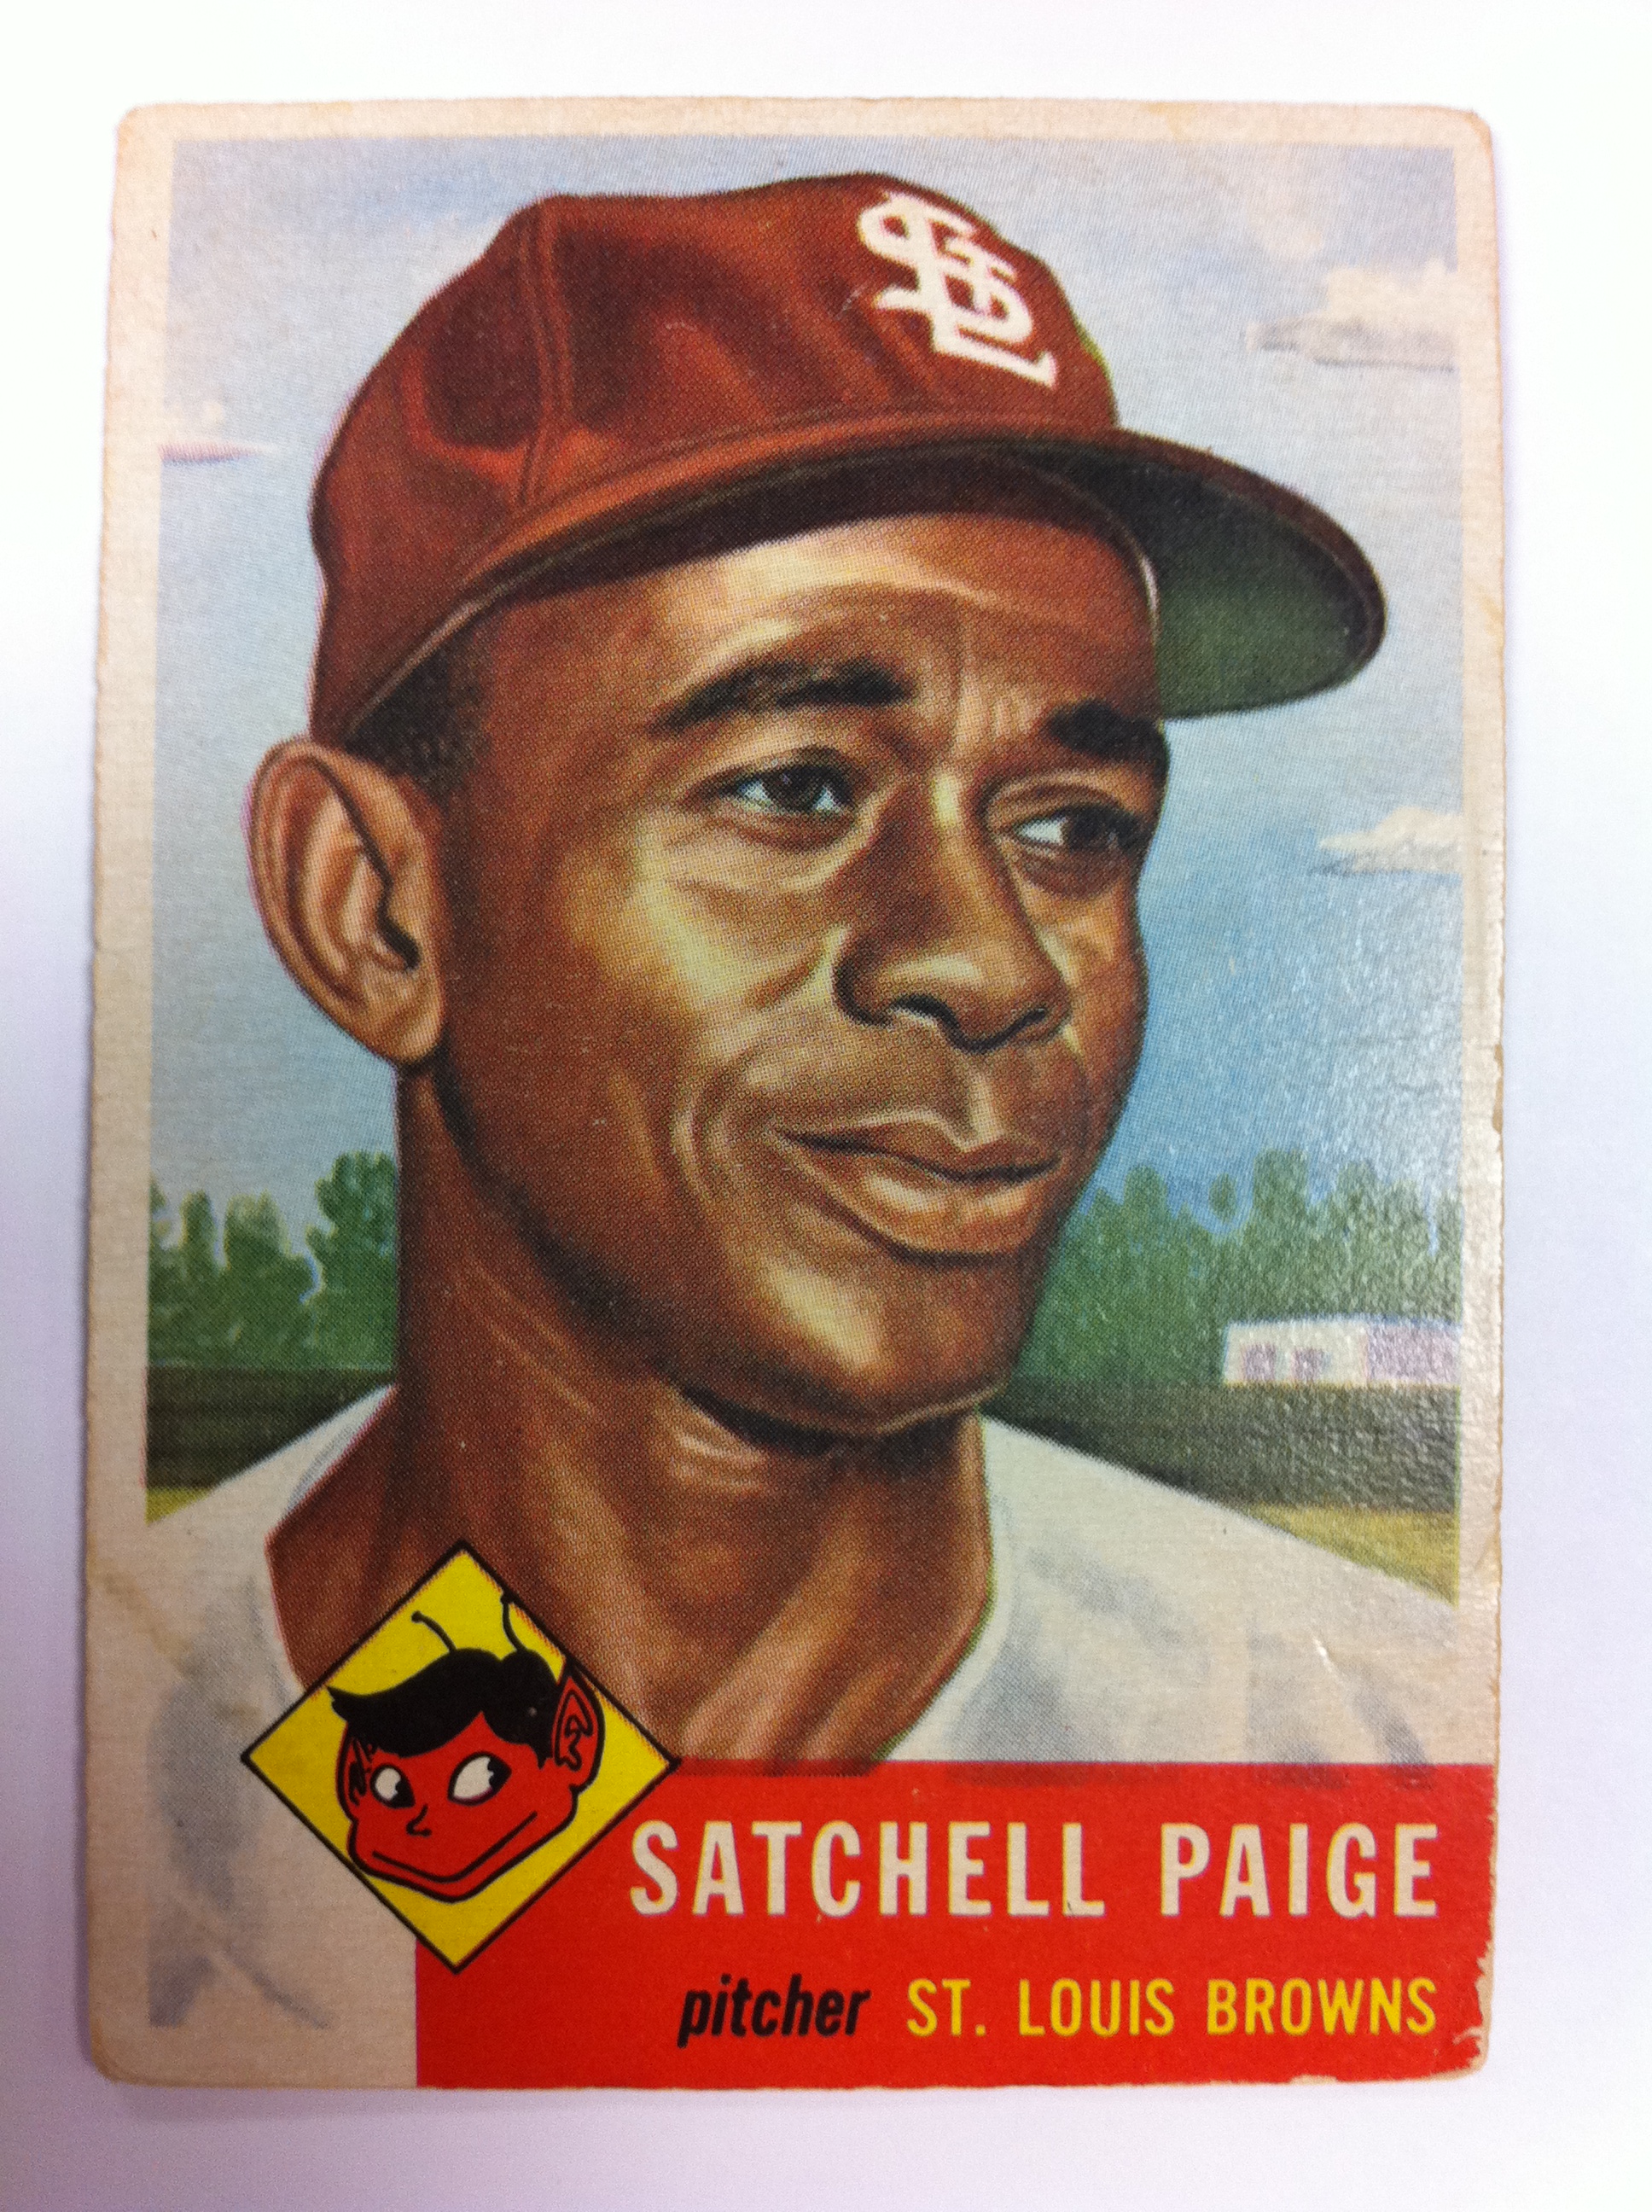 1953 Topps #220 Satchel Paige UER/Misspelled Satchell/on card front